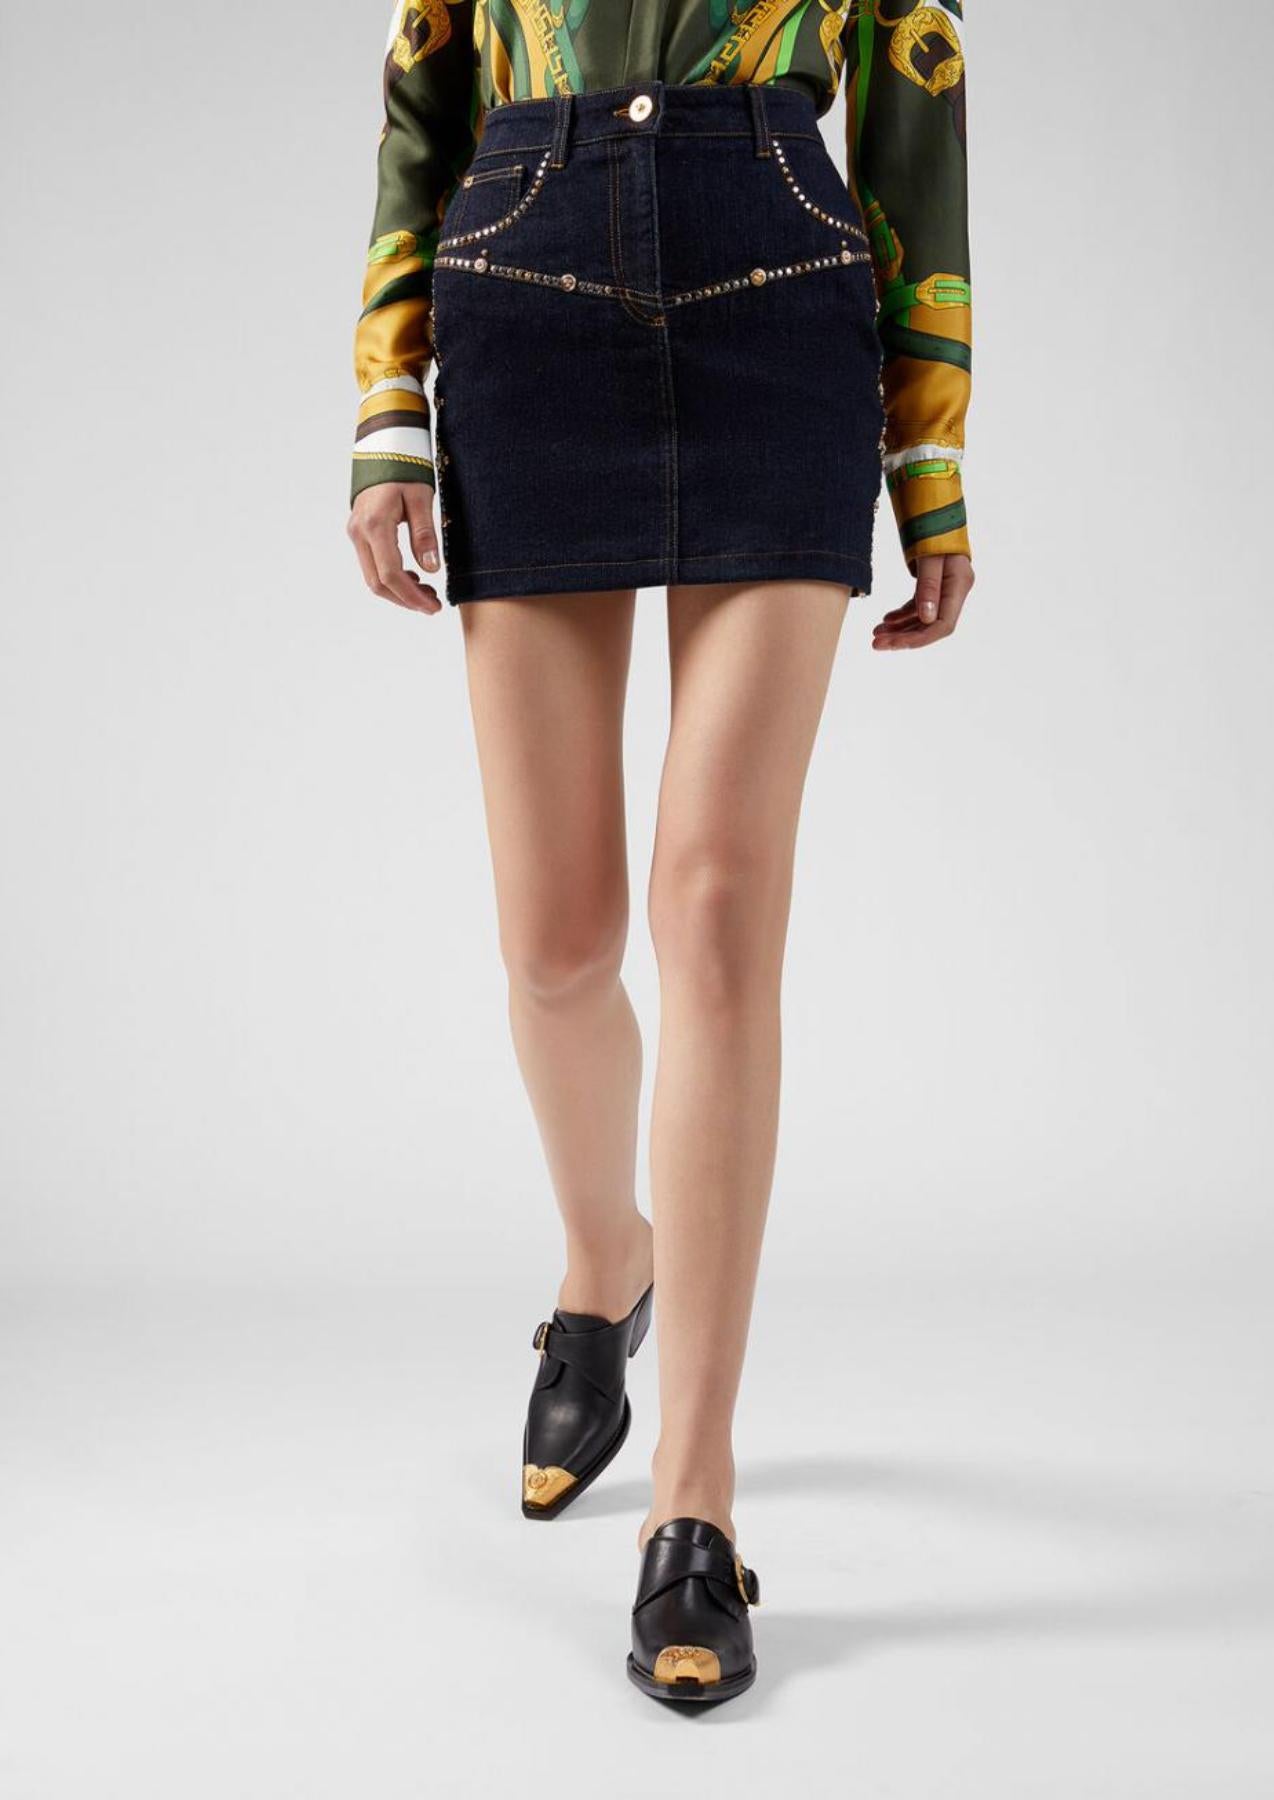 This Versace Resort 2020 jean mini skirt features dark blue denim, gold-tone stud embellishments, front button fastening, front pockets, one branded rear pocket, and a rear logo patch. Pair it with the matching Gianna signature studded jacket for